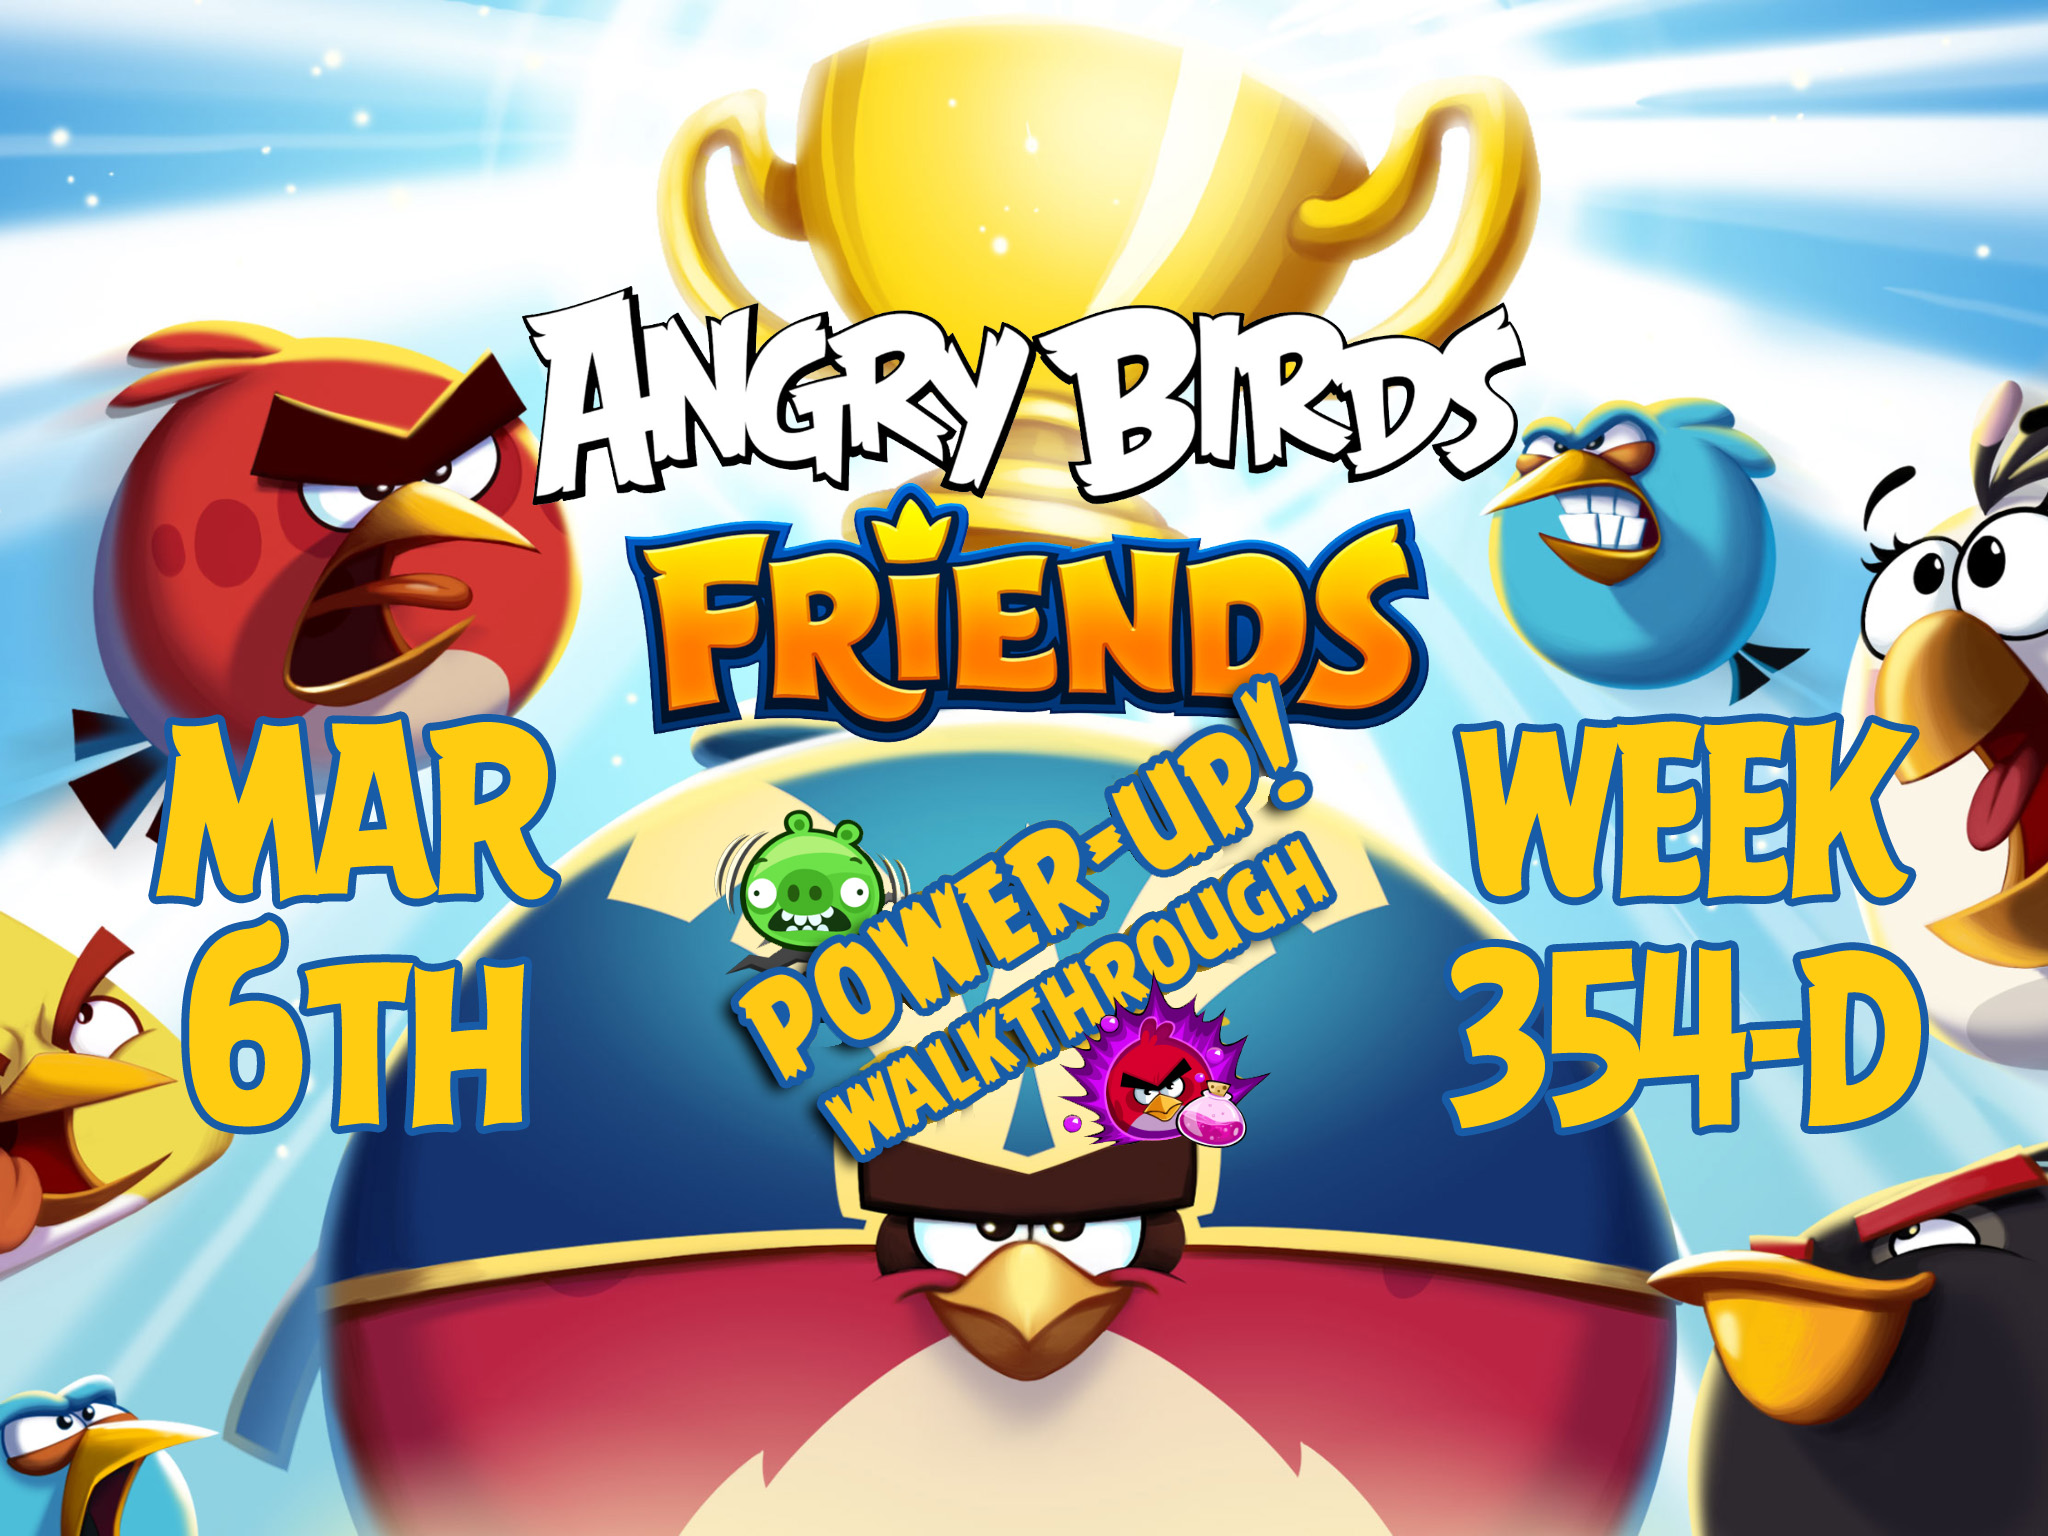 Angry-Birds-Friends-Tournament-Week-354-D-Feature-Image-PU